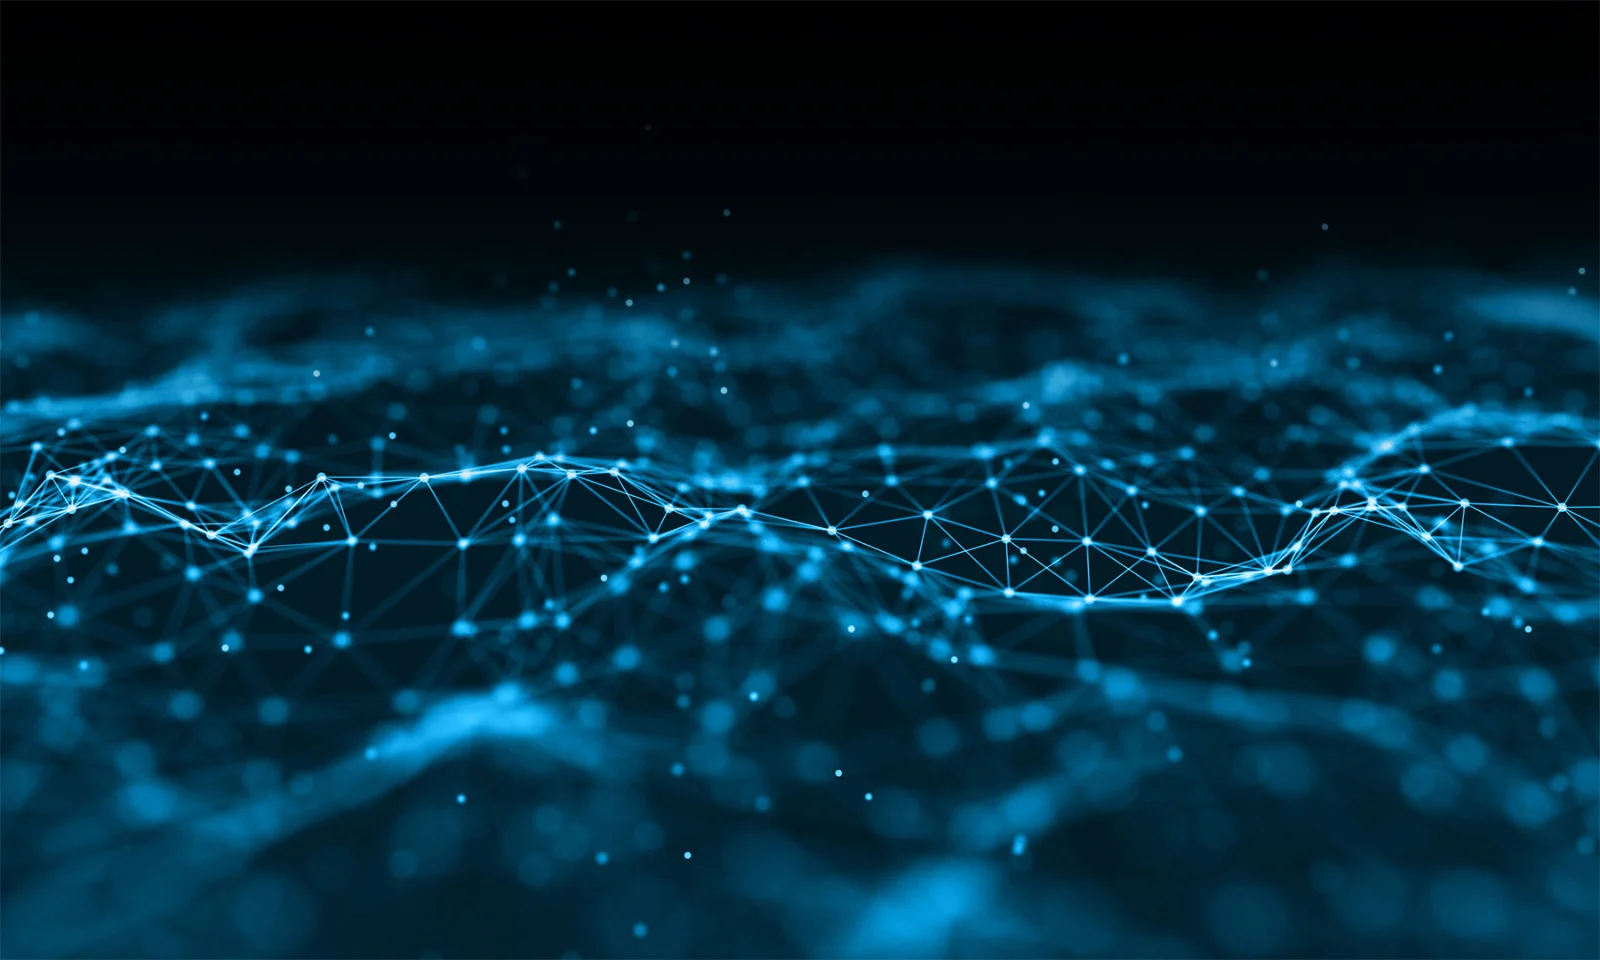 This image presents an abstract visualization of a digital network, characterized by interconnected nodes and lines against a dark background. The glowing blue network lines create a dynamic and futuristic look, symbolizing advanced technology and connectivity. This visual is ideal for representing themes related to digital communication, networking, data transfer, and technological innovation.